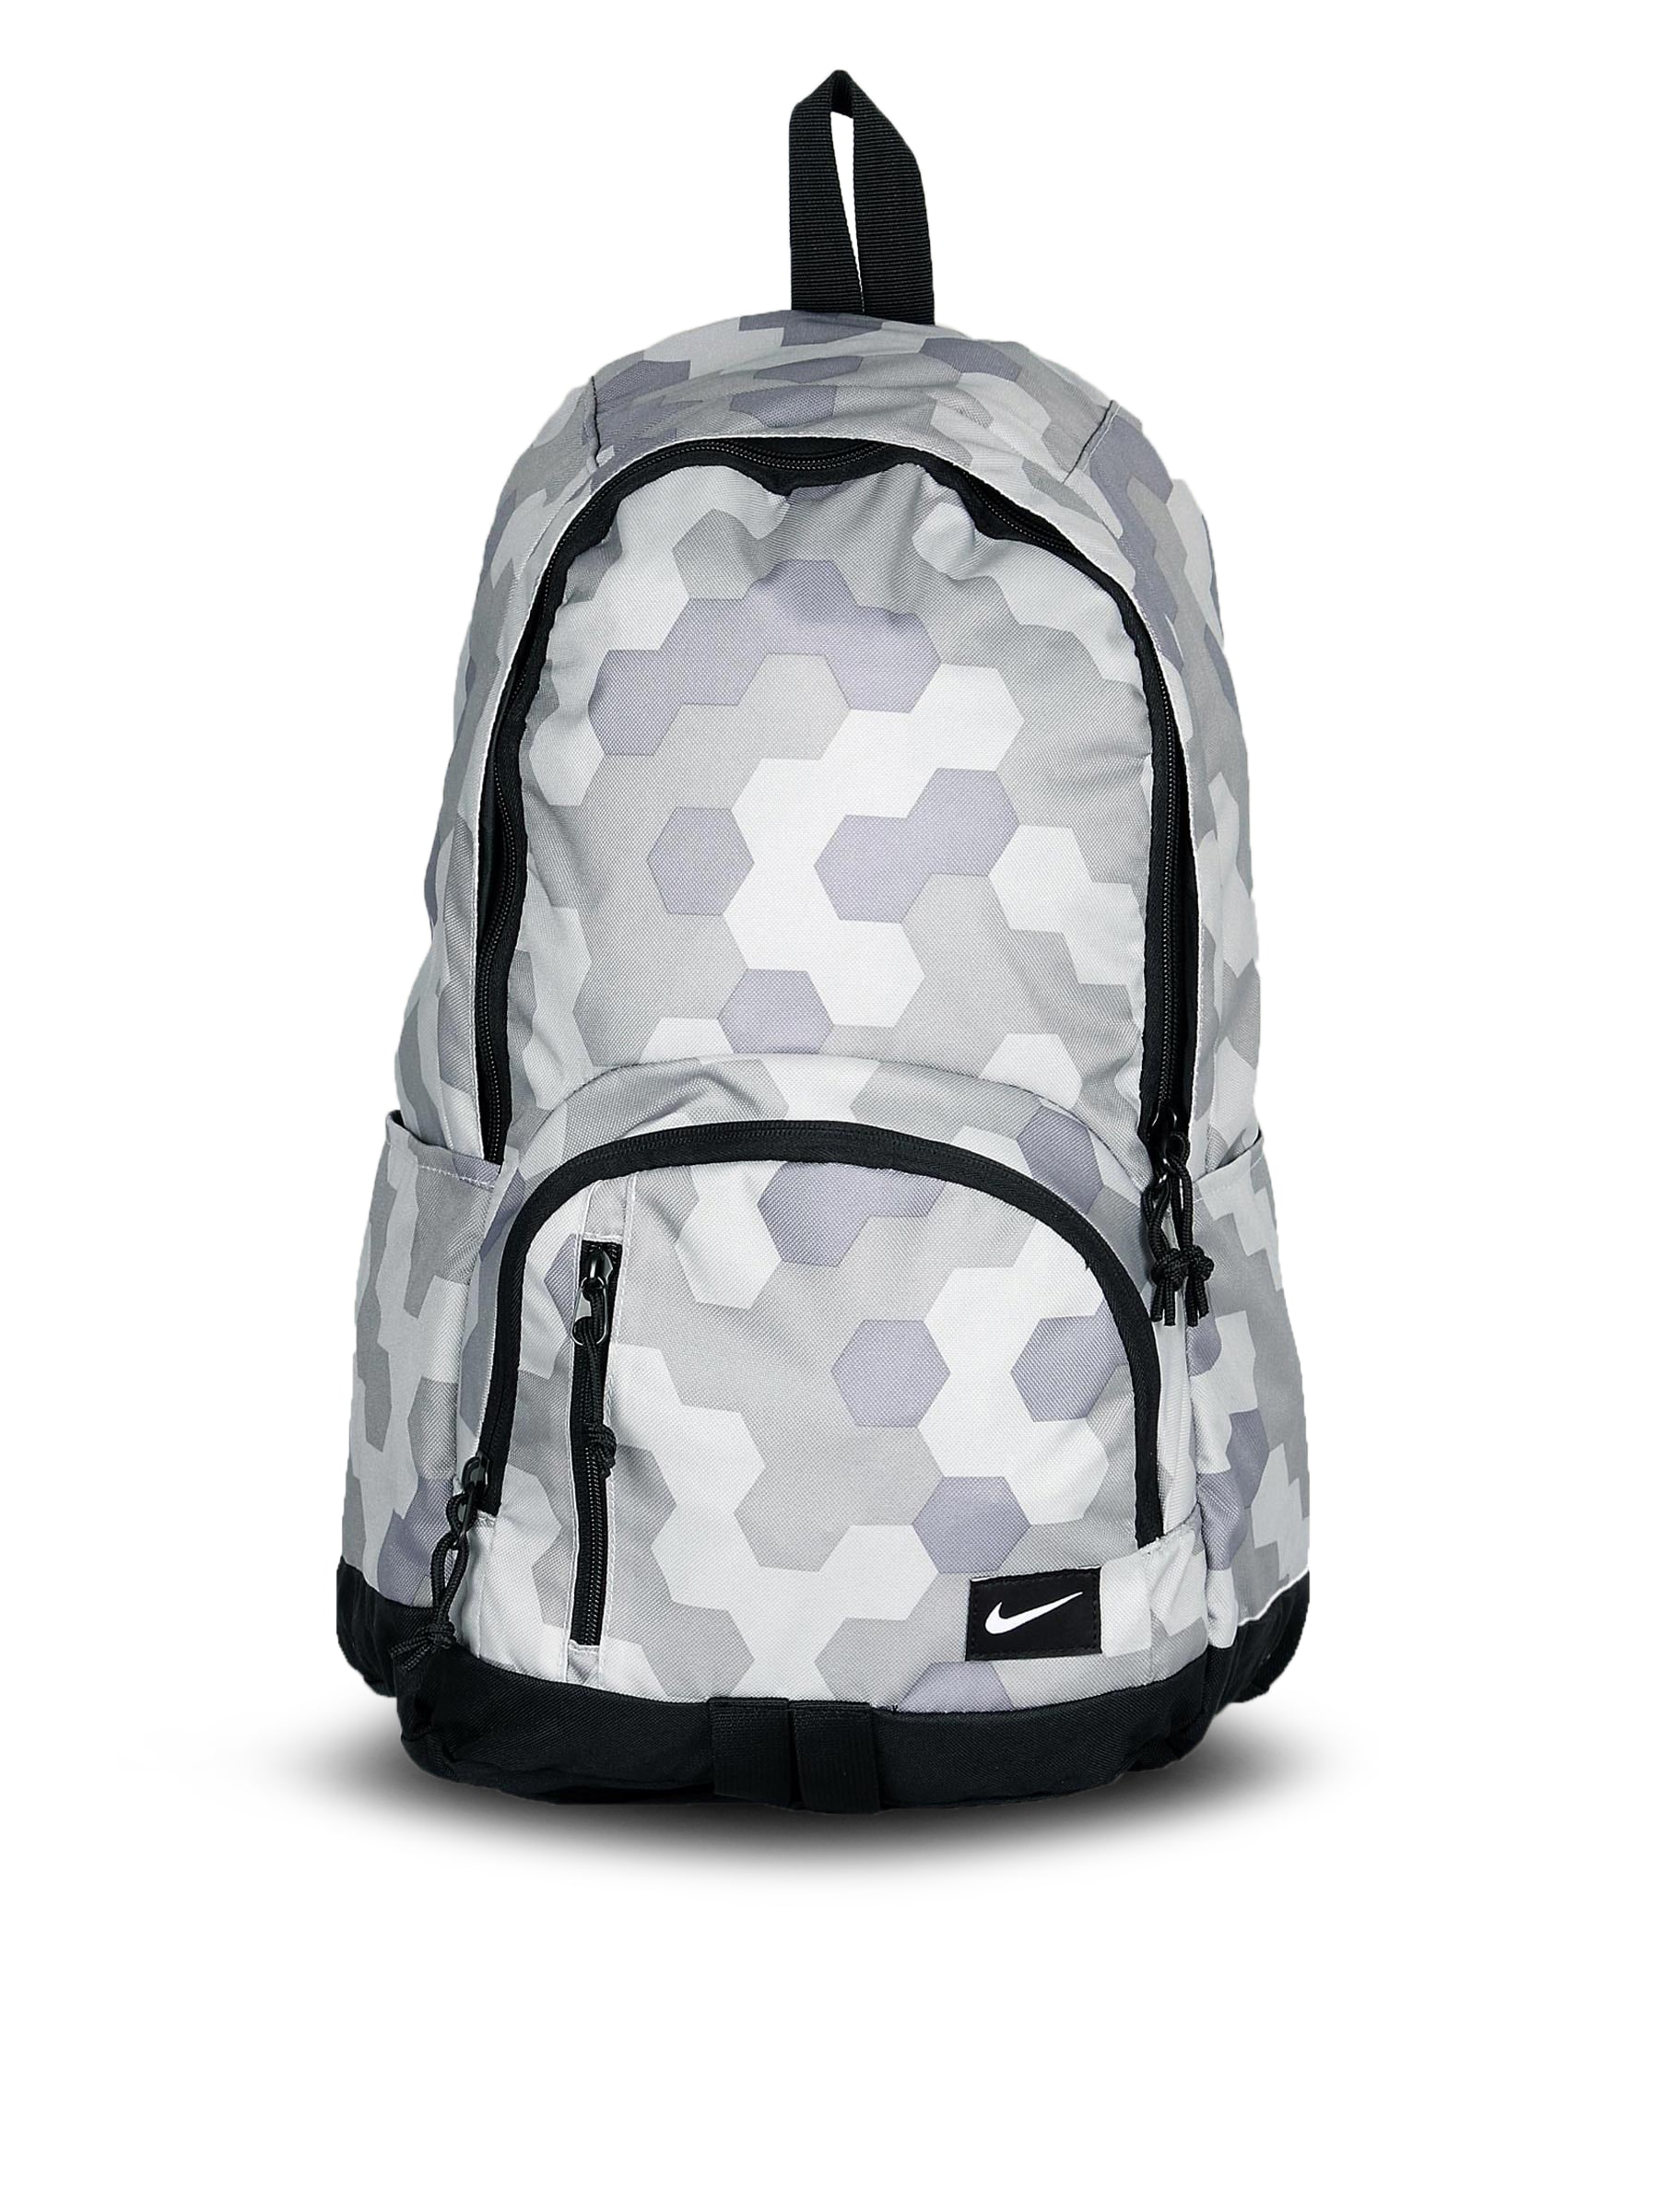 Nike Unisex All Access SO Grey Backpack